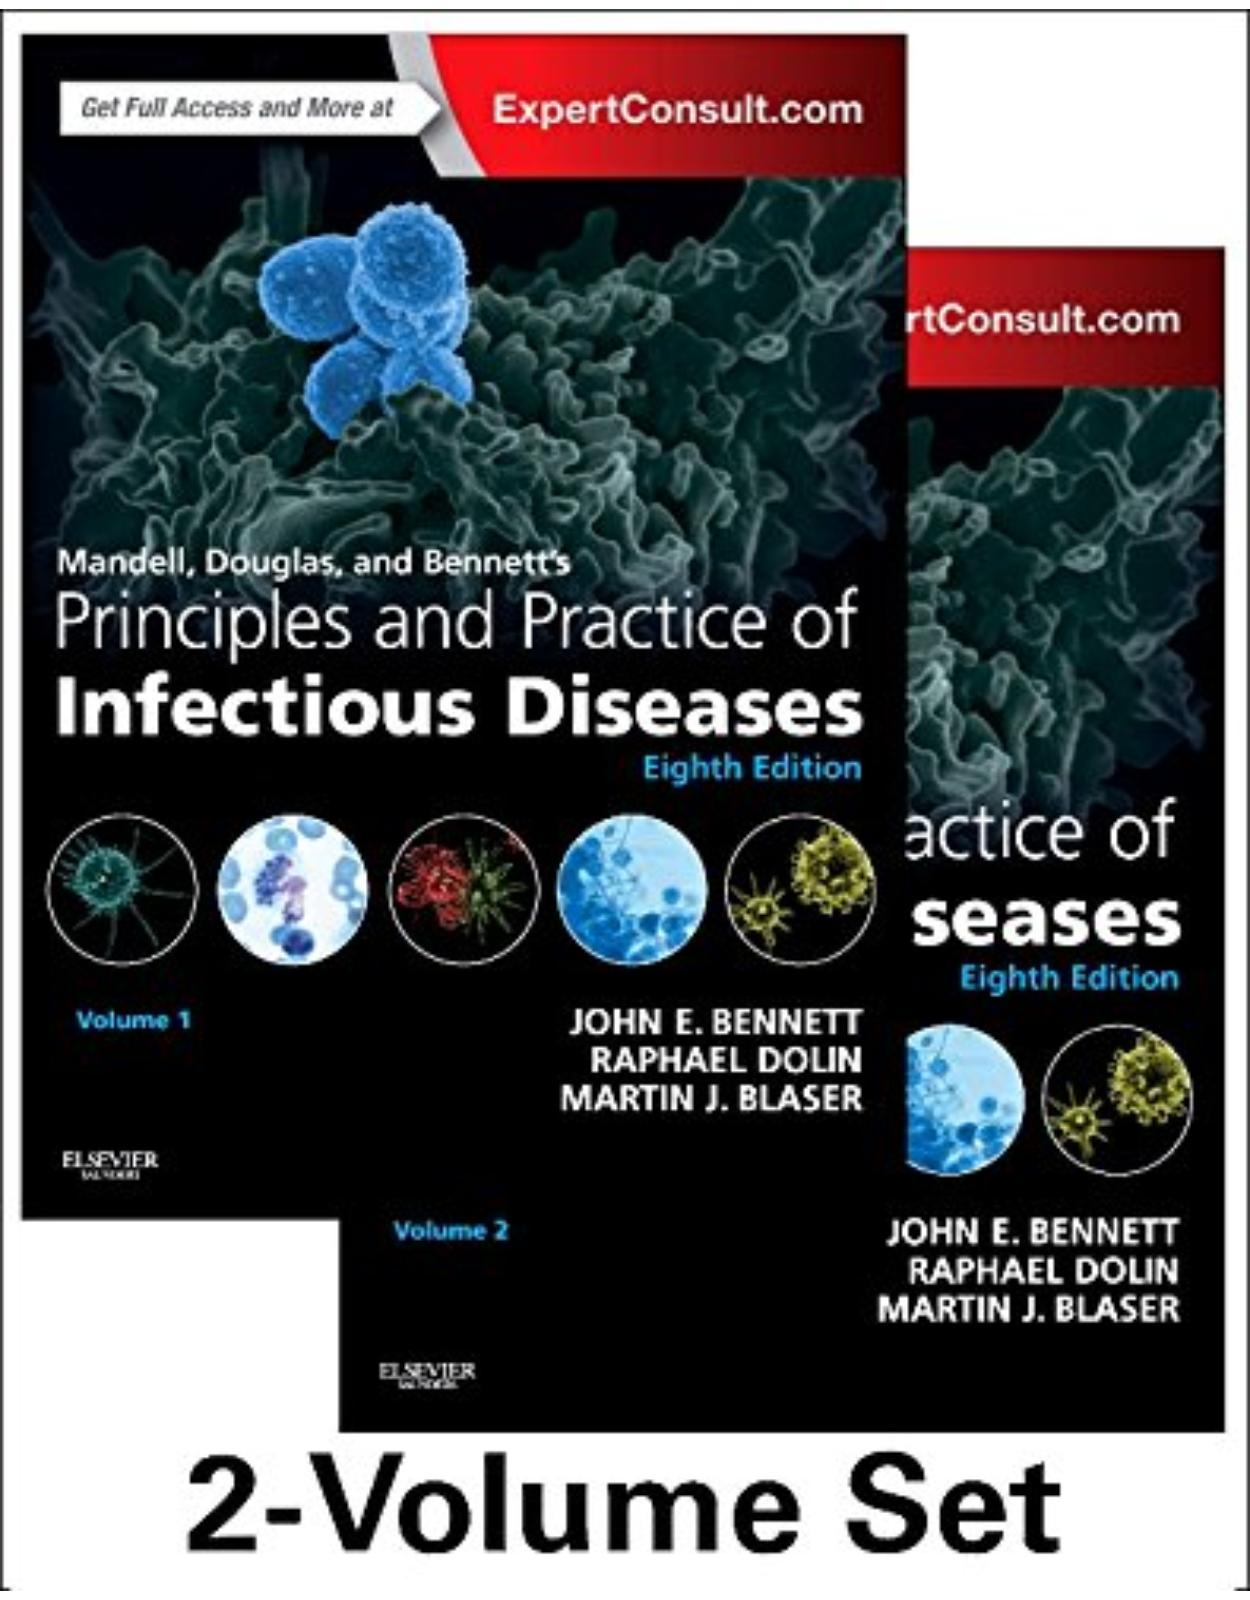 Mandell, Douglas, and Bennett's Principles and Practice of Infectious Diseases, 8th Edition 